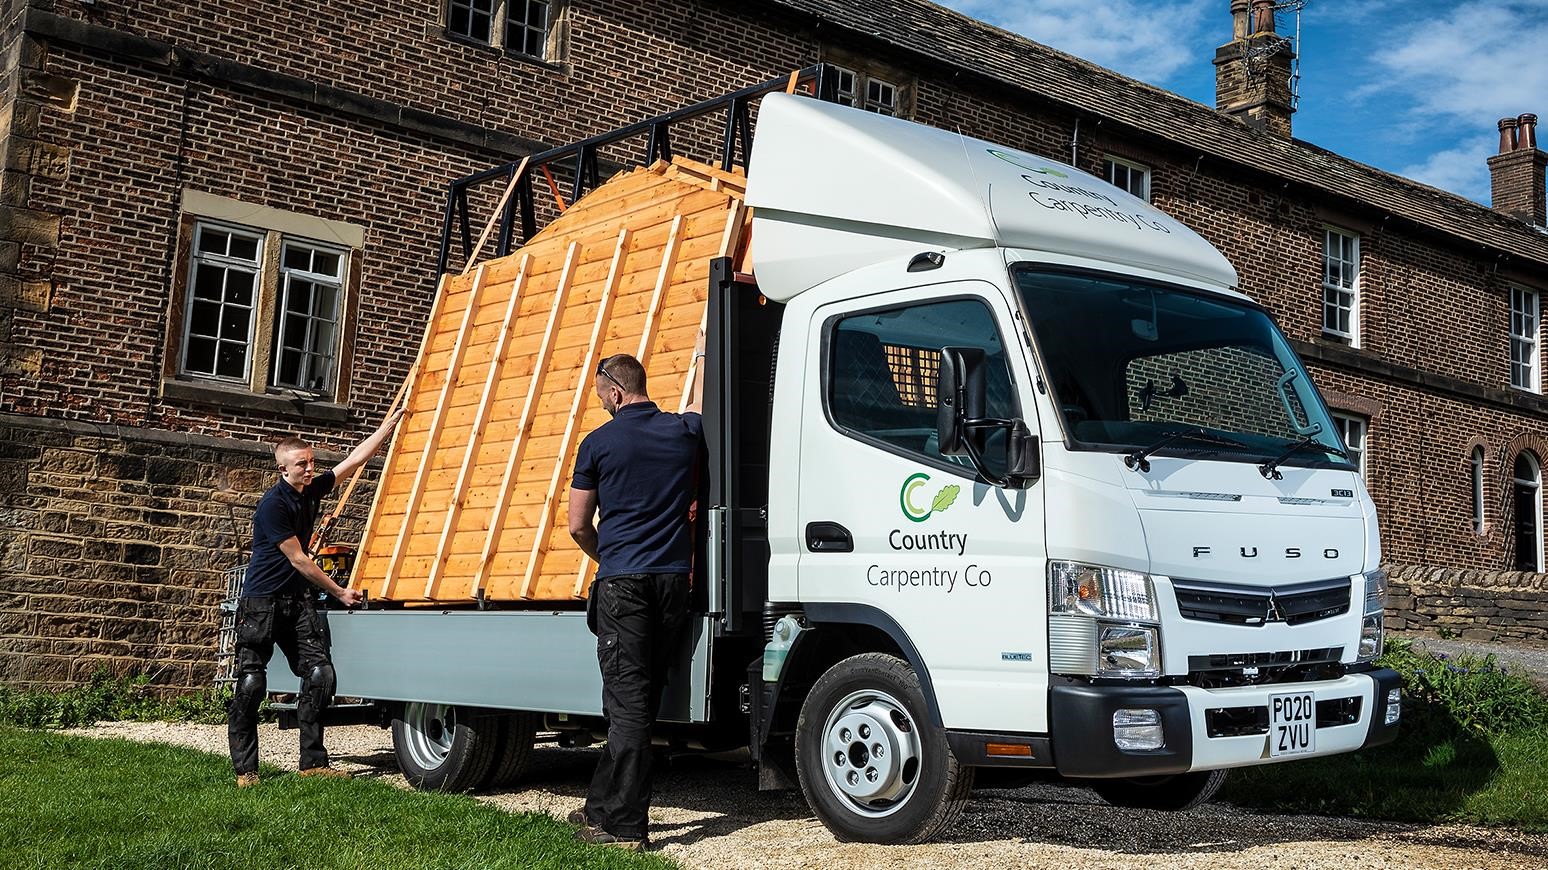 FUSO Canter Delivers Robust, Ready-To-Work Platform For Country Carpentry